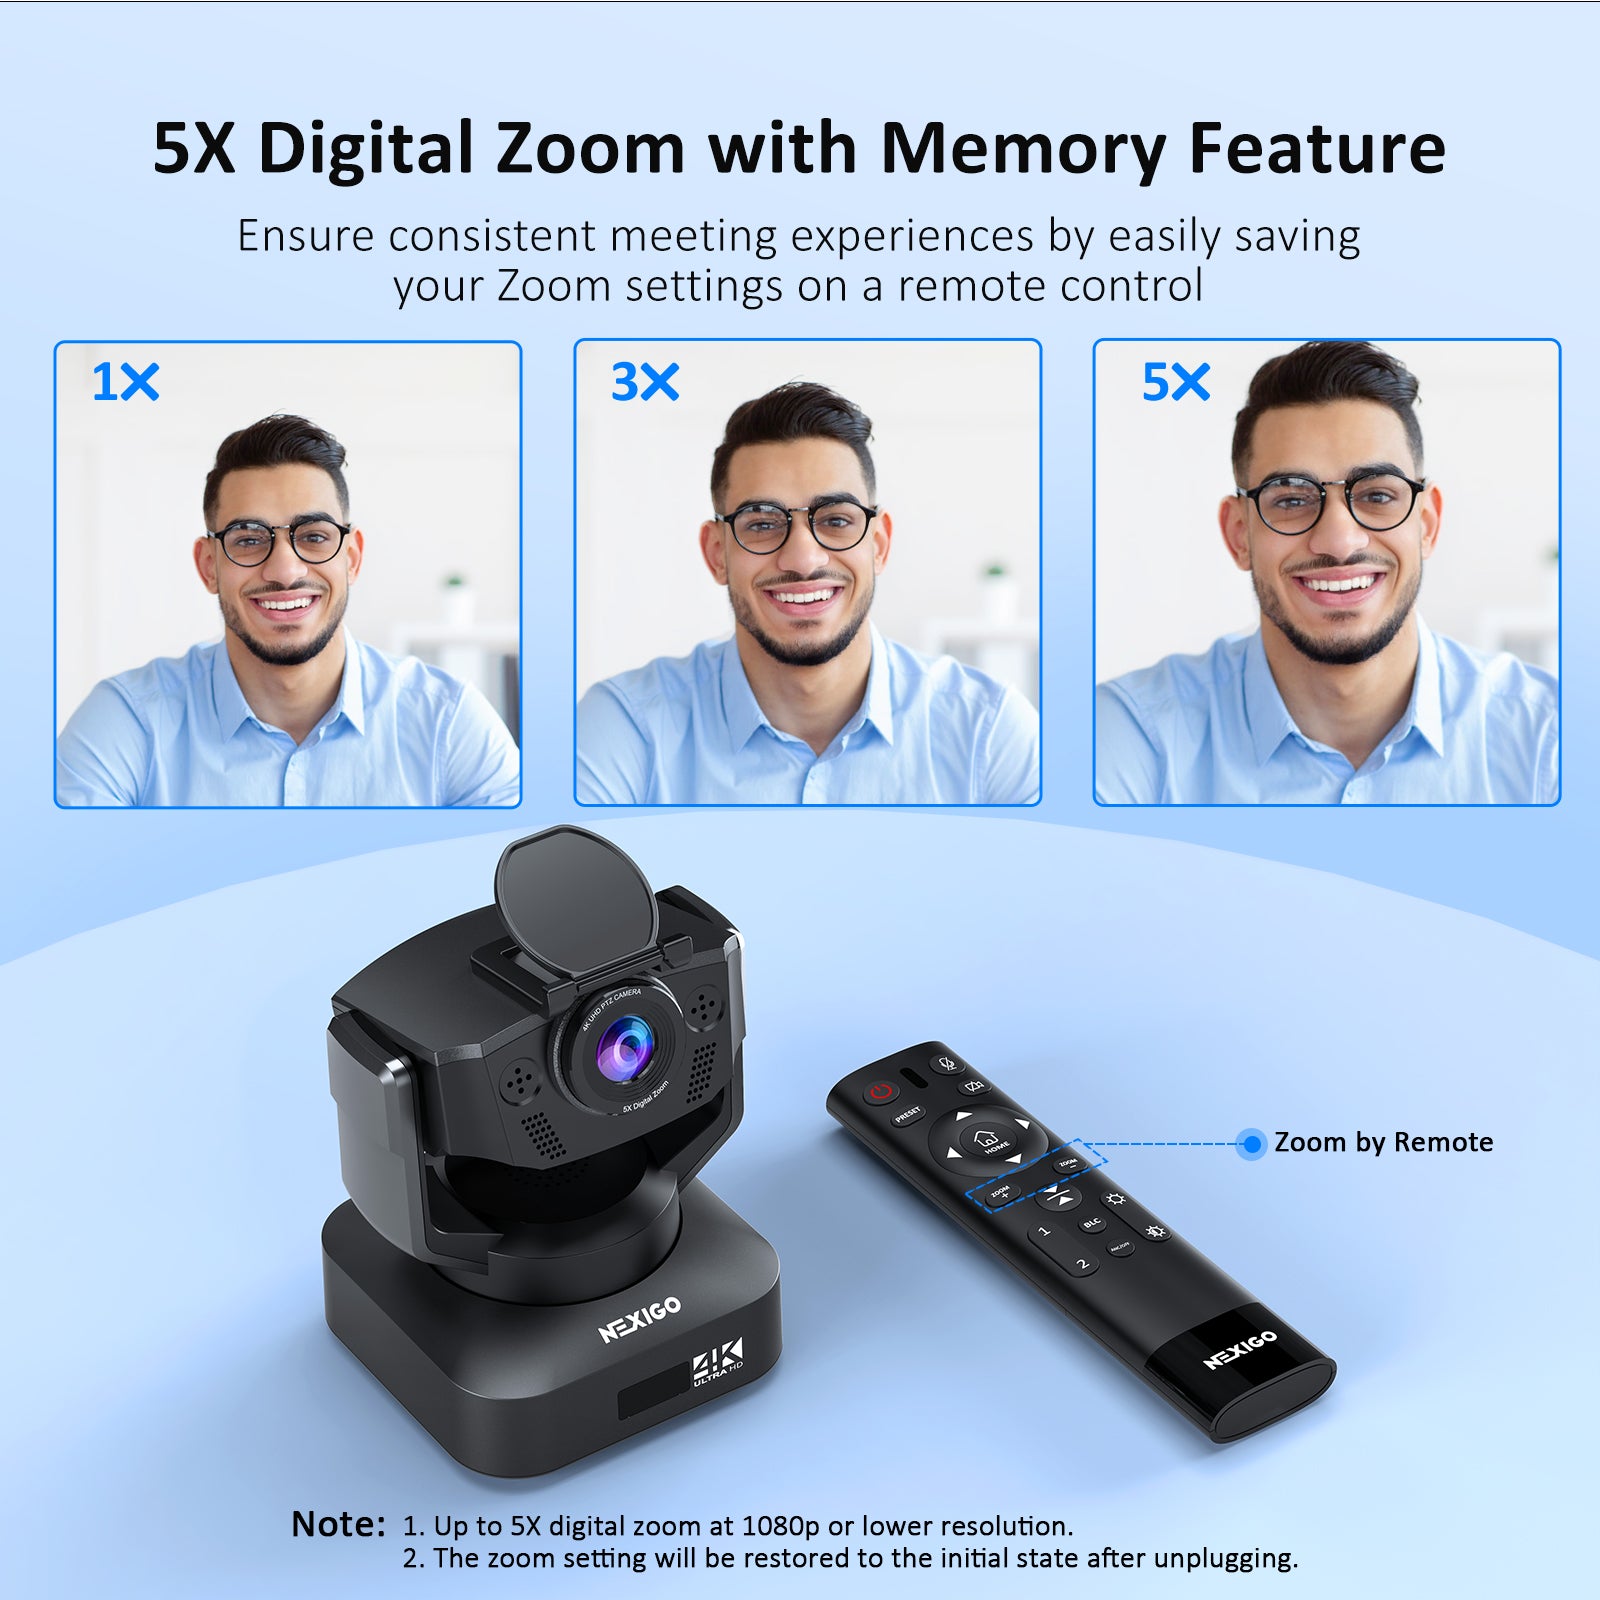 Webcam offers 5x digital zoom with remote control